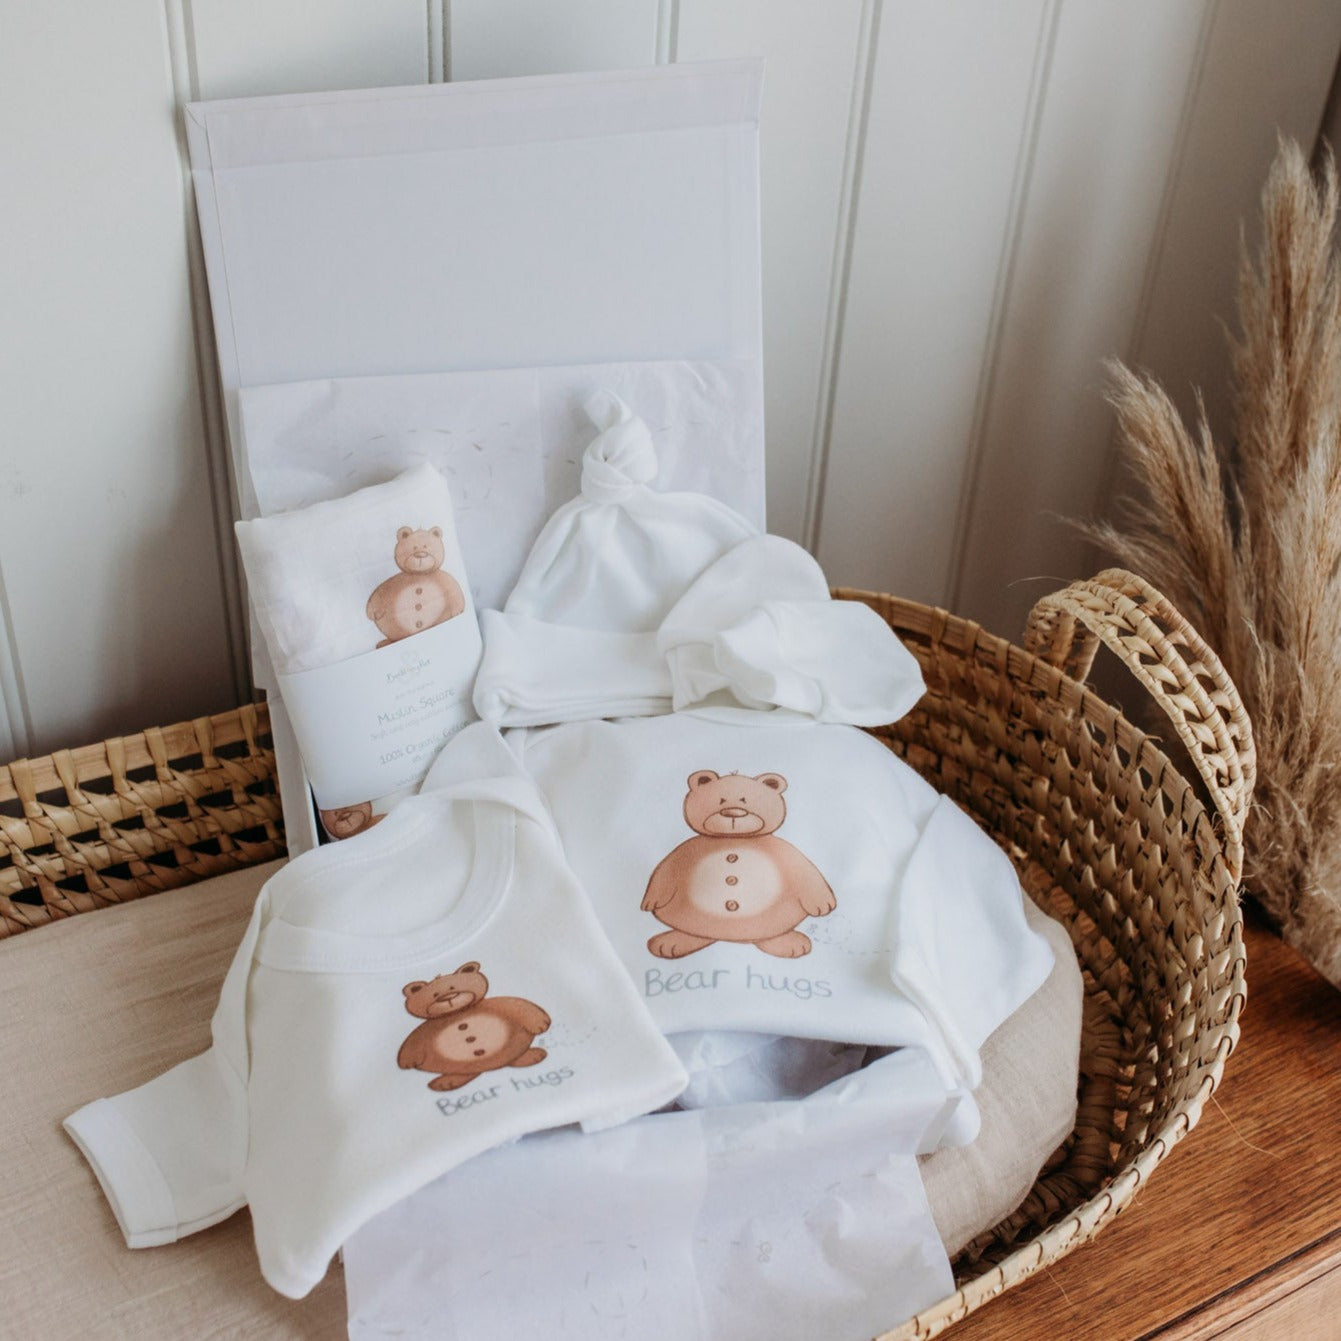 woodland bear organic cotton new baby clothing gift set with luxury gift hamper placed inside a moses basket